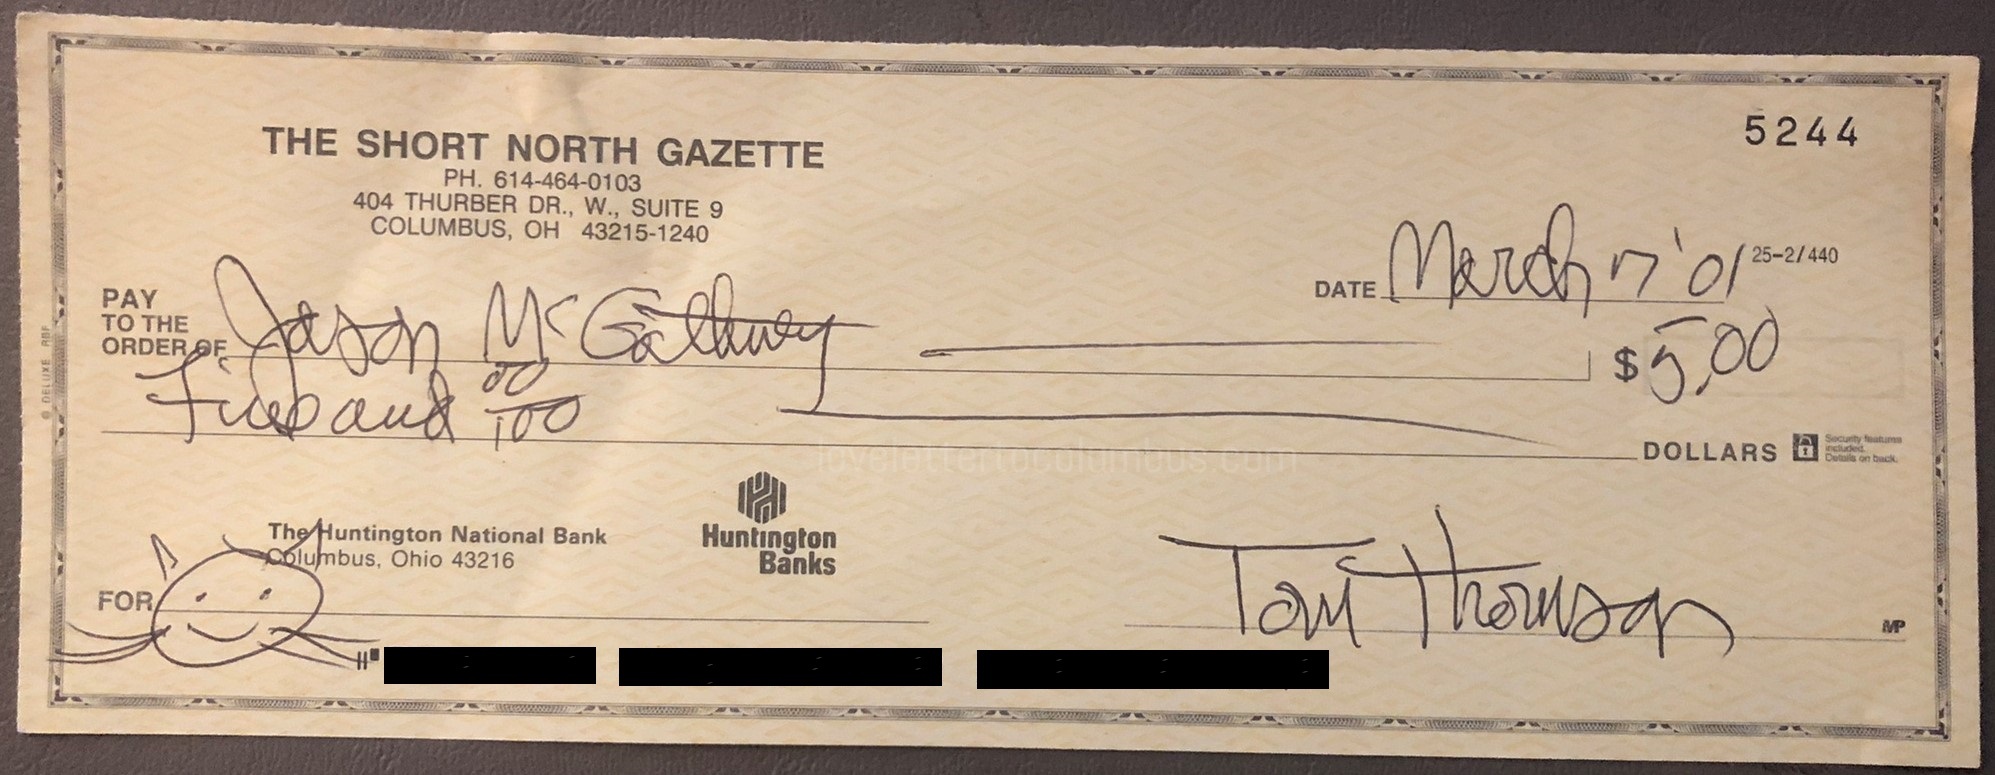 Check from Short North Gazette